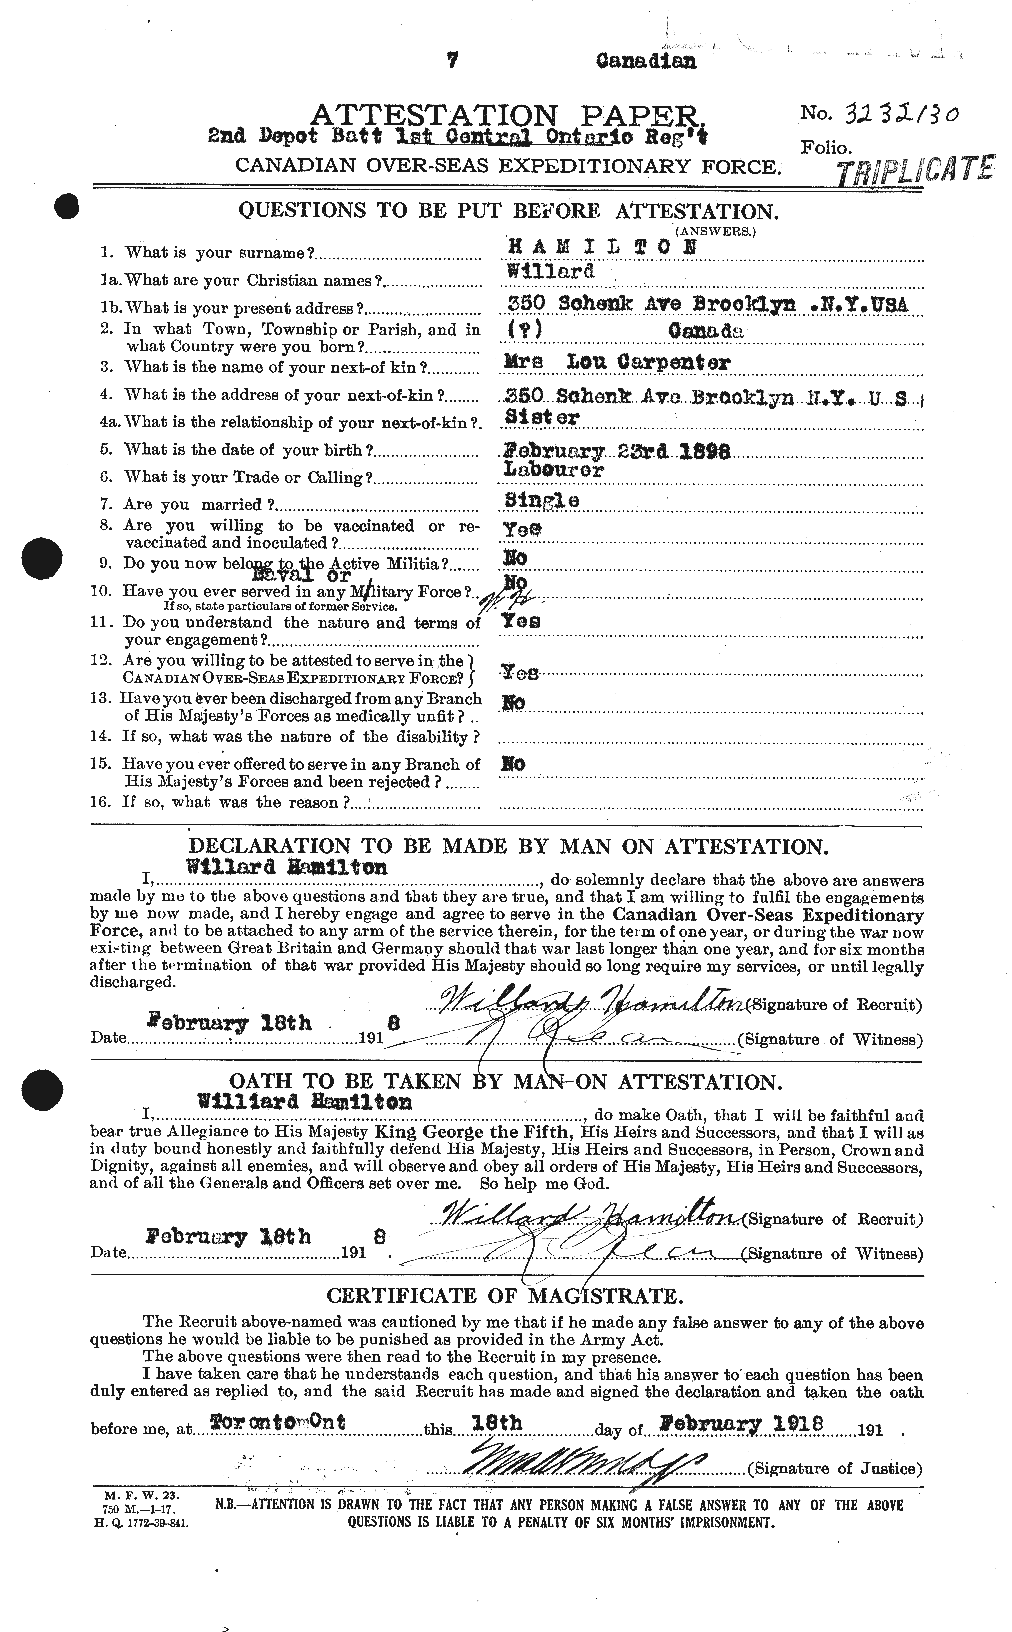 Personnel Records of the First World War - CEF 374830a